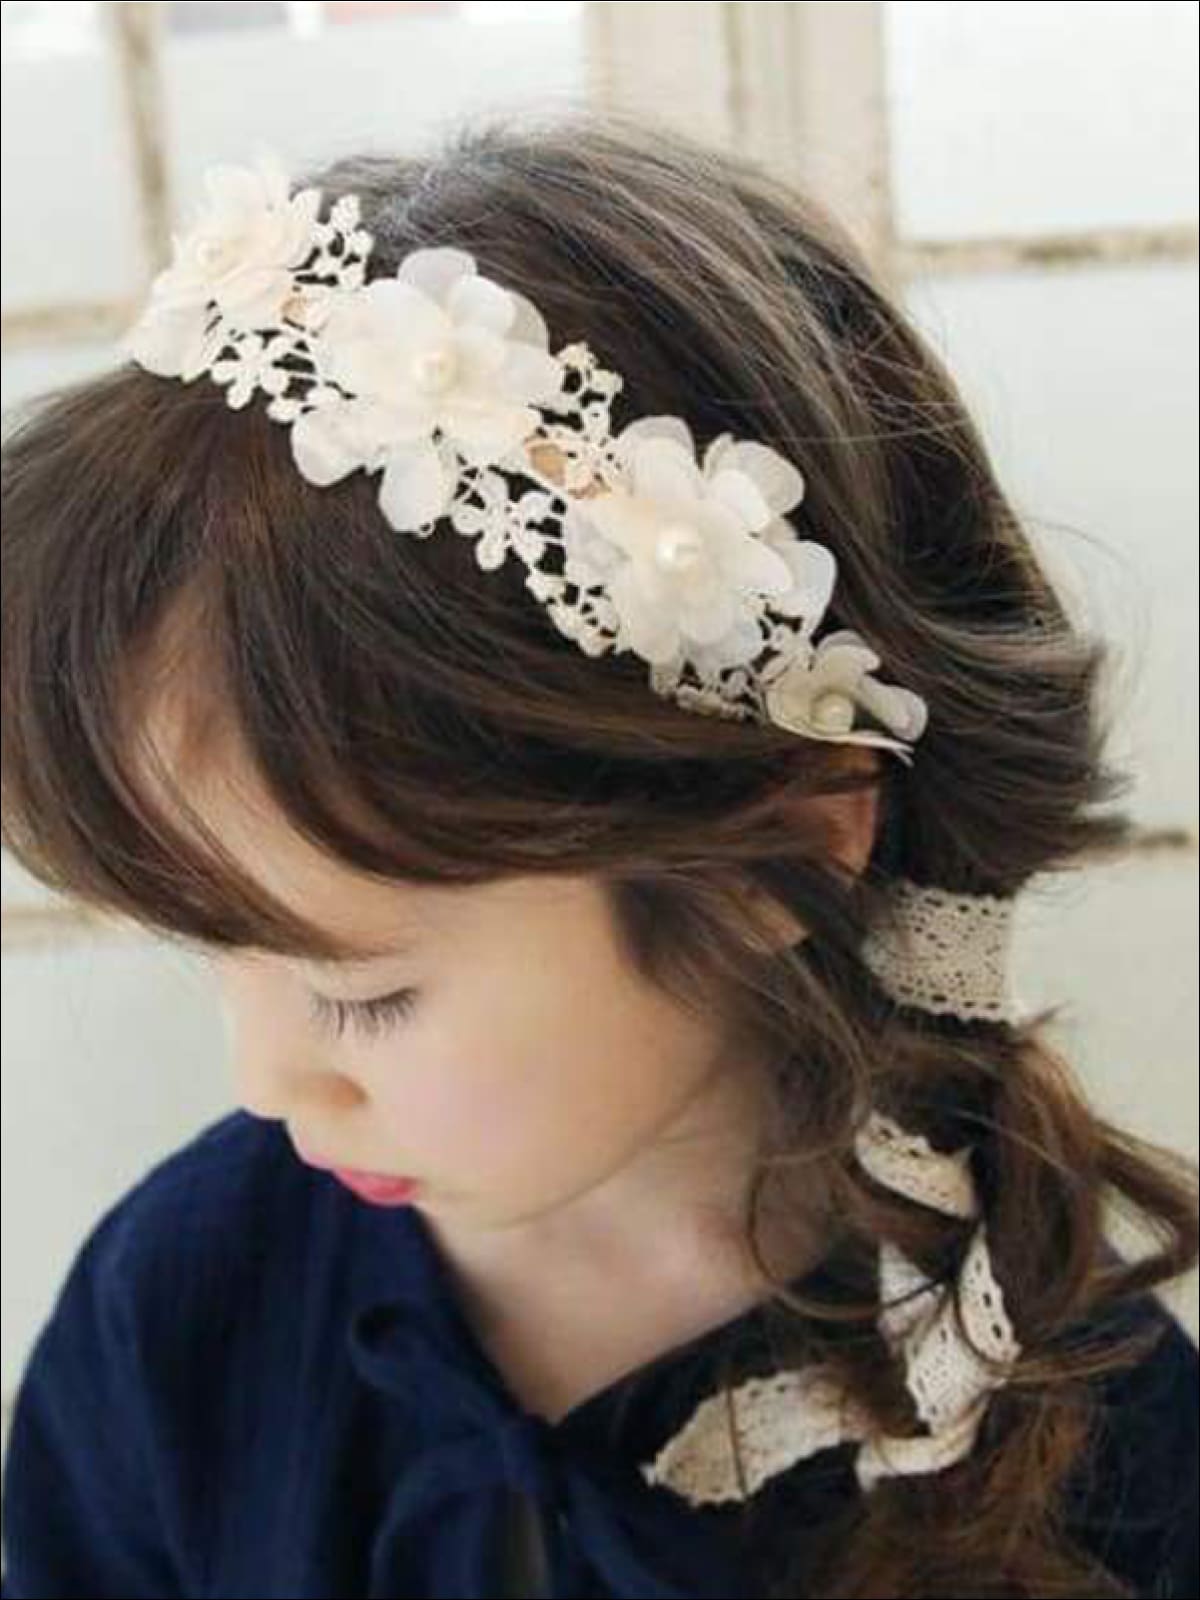 https://cdn.shopify.com/s/files/1/0996/1812/products/girls-lace-flower-headband-19-99-and-under-20-39-40-59-accessories-afterchristmas-hair-mia-belle-overseas-fulfillment-baby_738.jpg